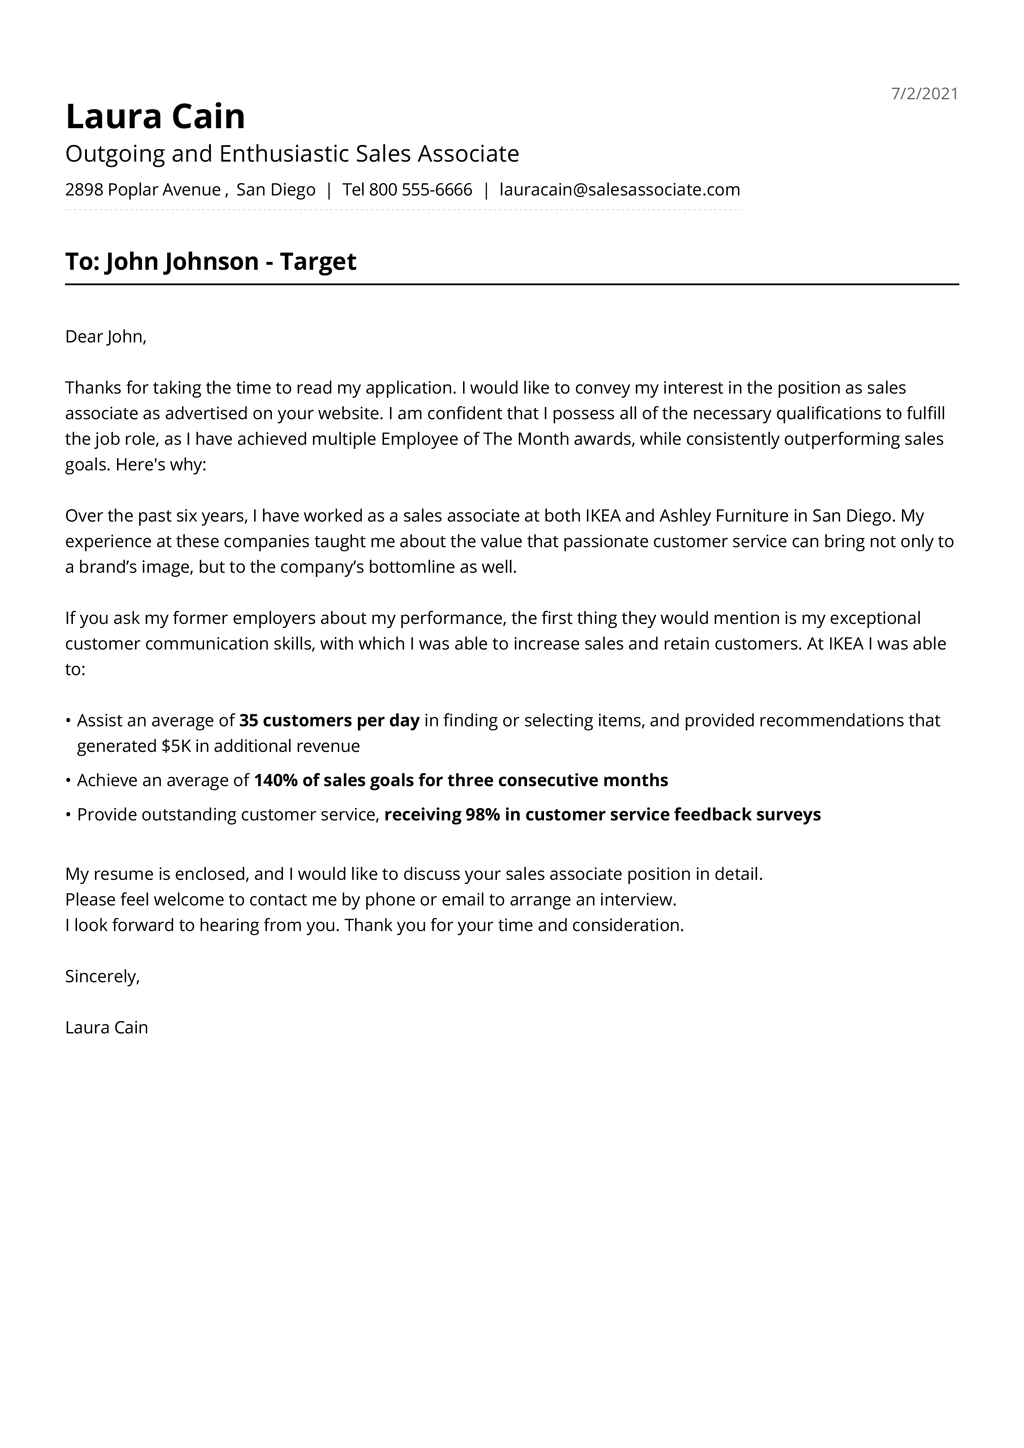 Eye Catching Cover Letter Sample from jofibo.com